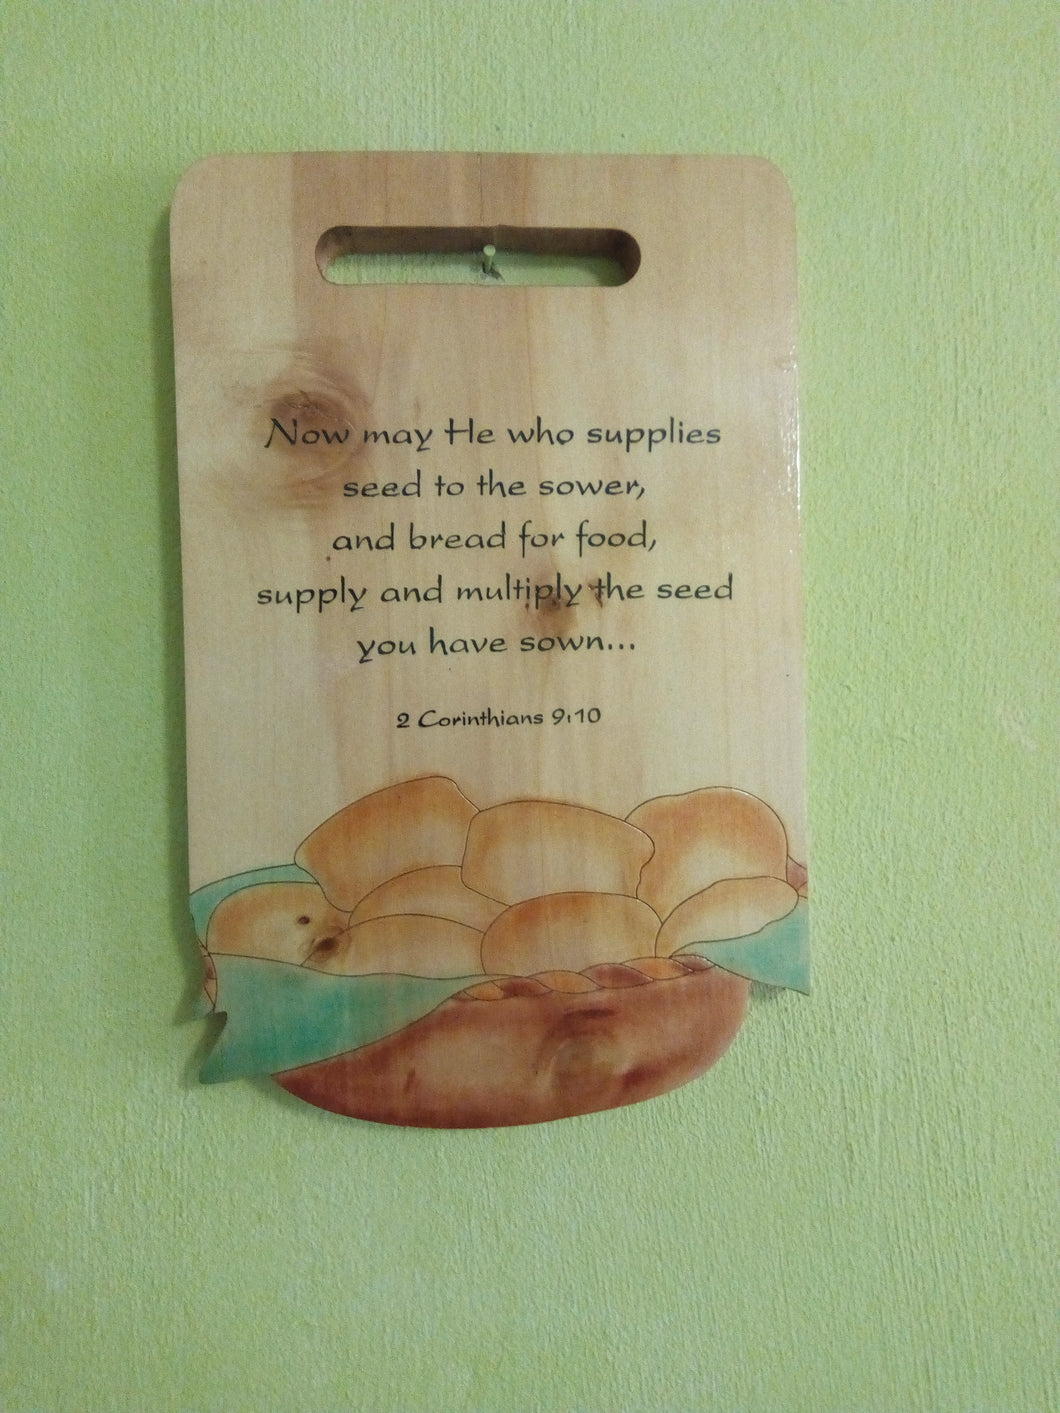 Wooden Bread Board Plaque - Now may He who supplies seed to the sower.2 Corinthians 9:10